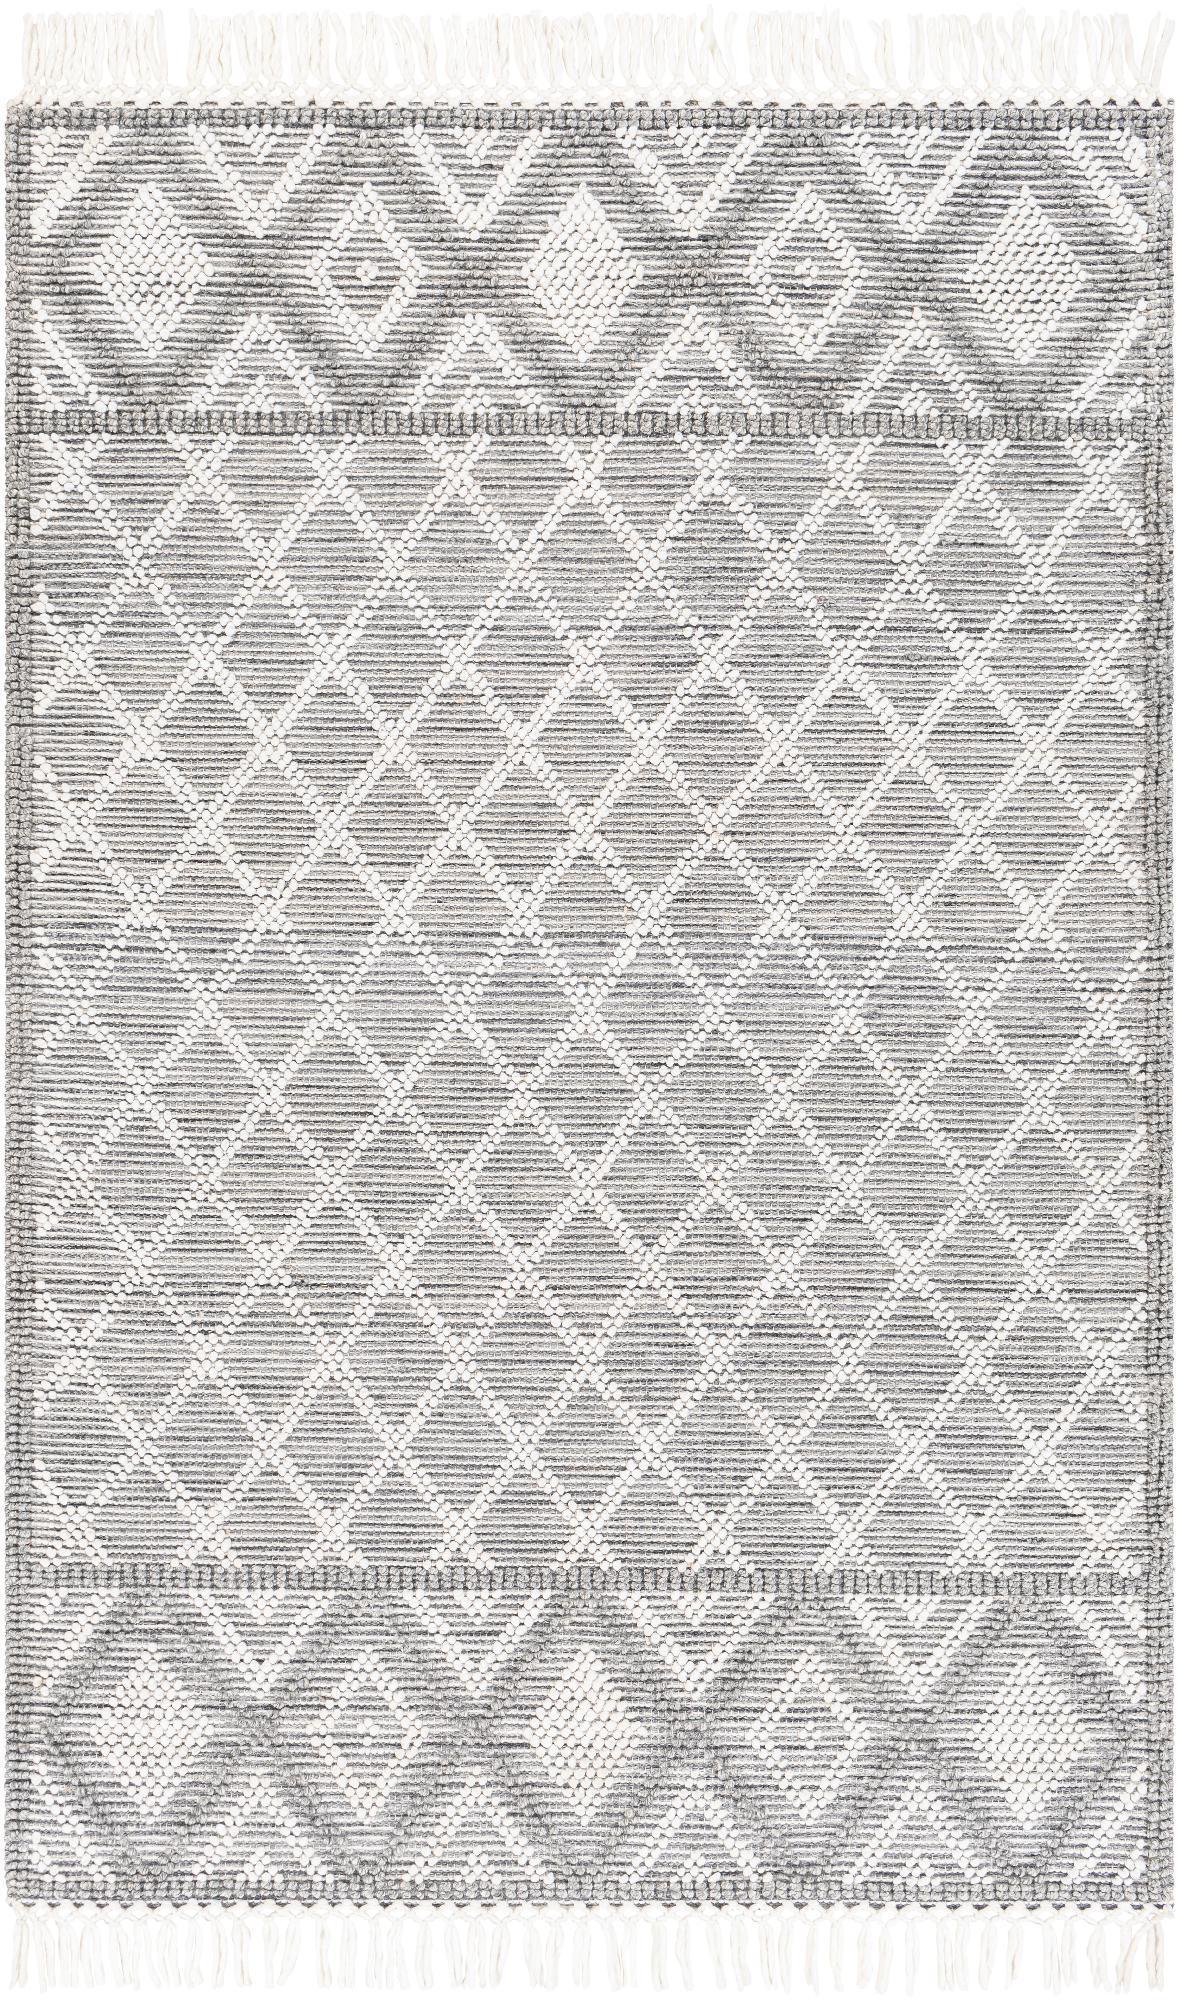 Mark&Day Area Rugs, 2x4 Ovgoros Global Light Gray Area Rug (2'3" x 3'9") - image 2 of 6